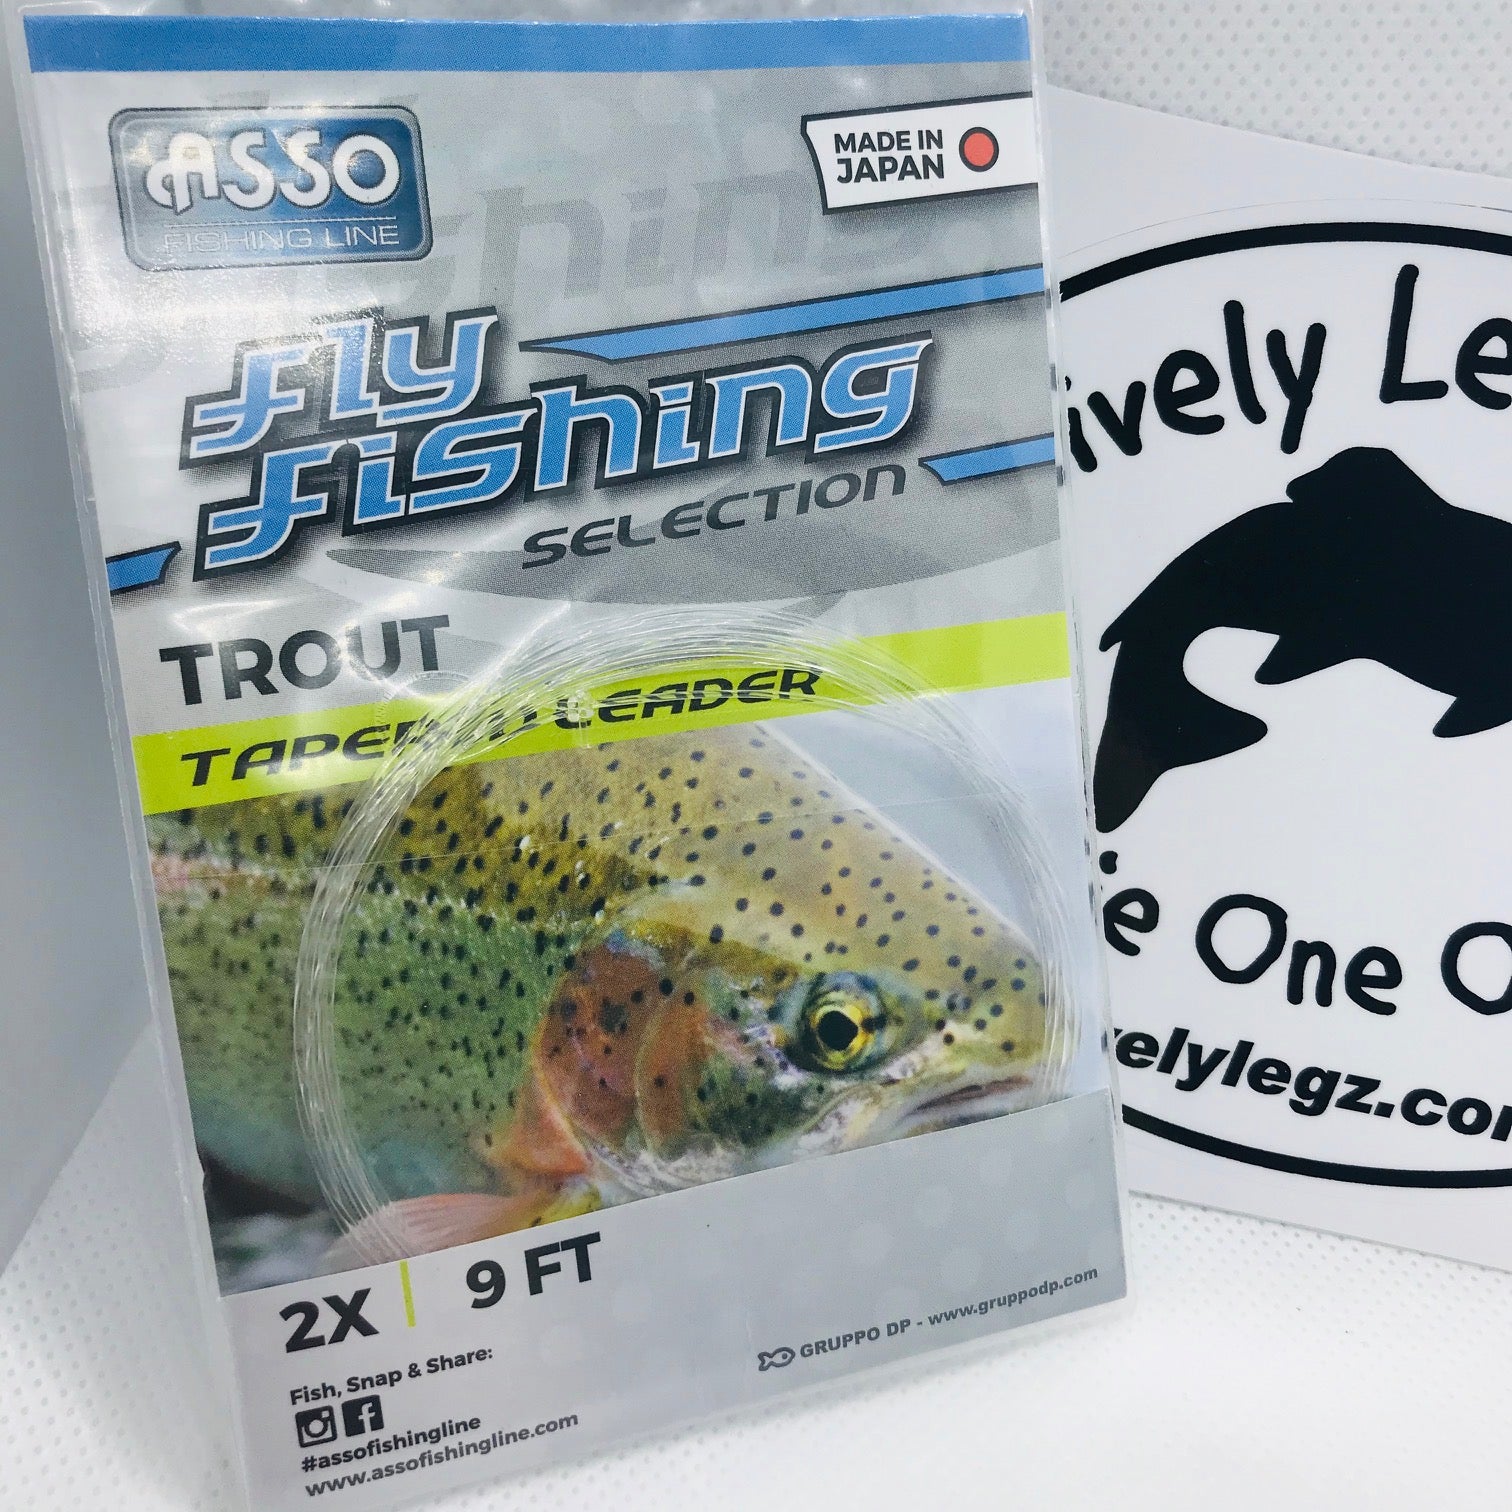 ASSO Trout Tapered Leaders – Lively Legz Fly Fishing